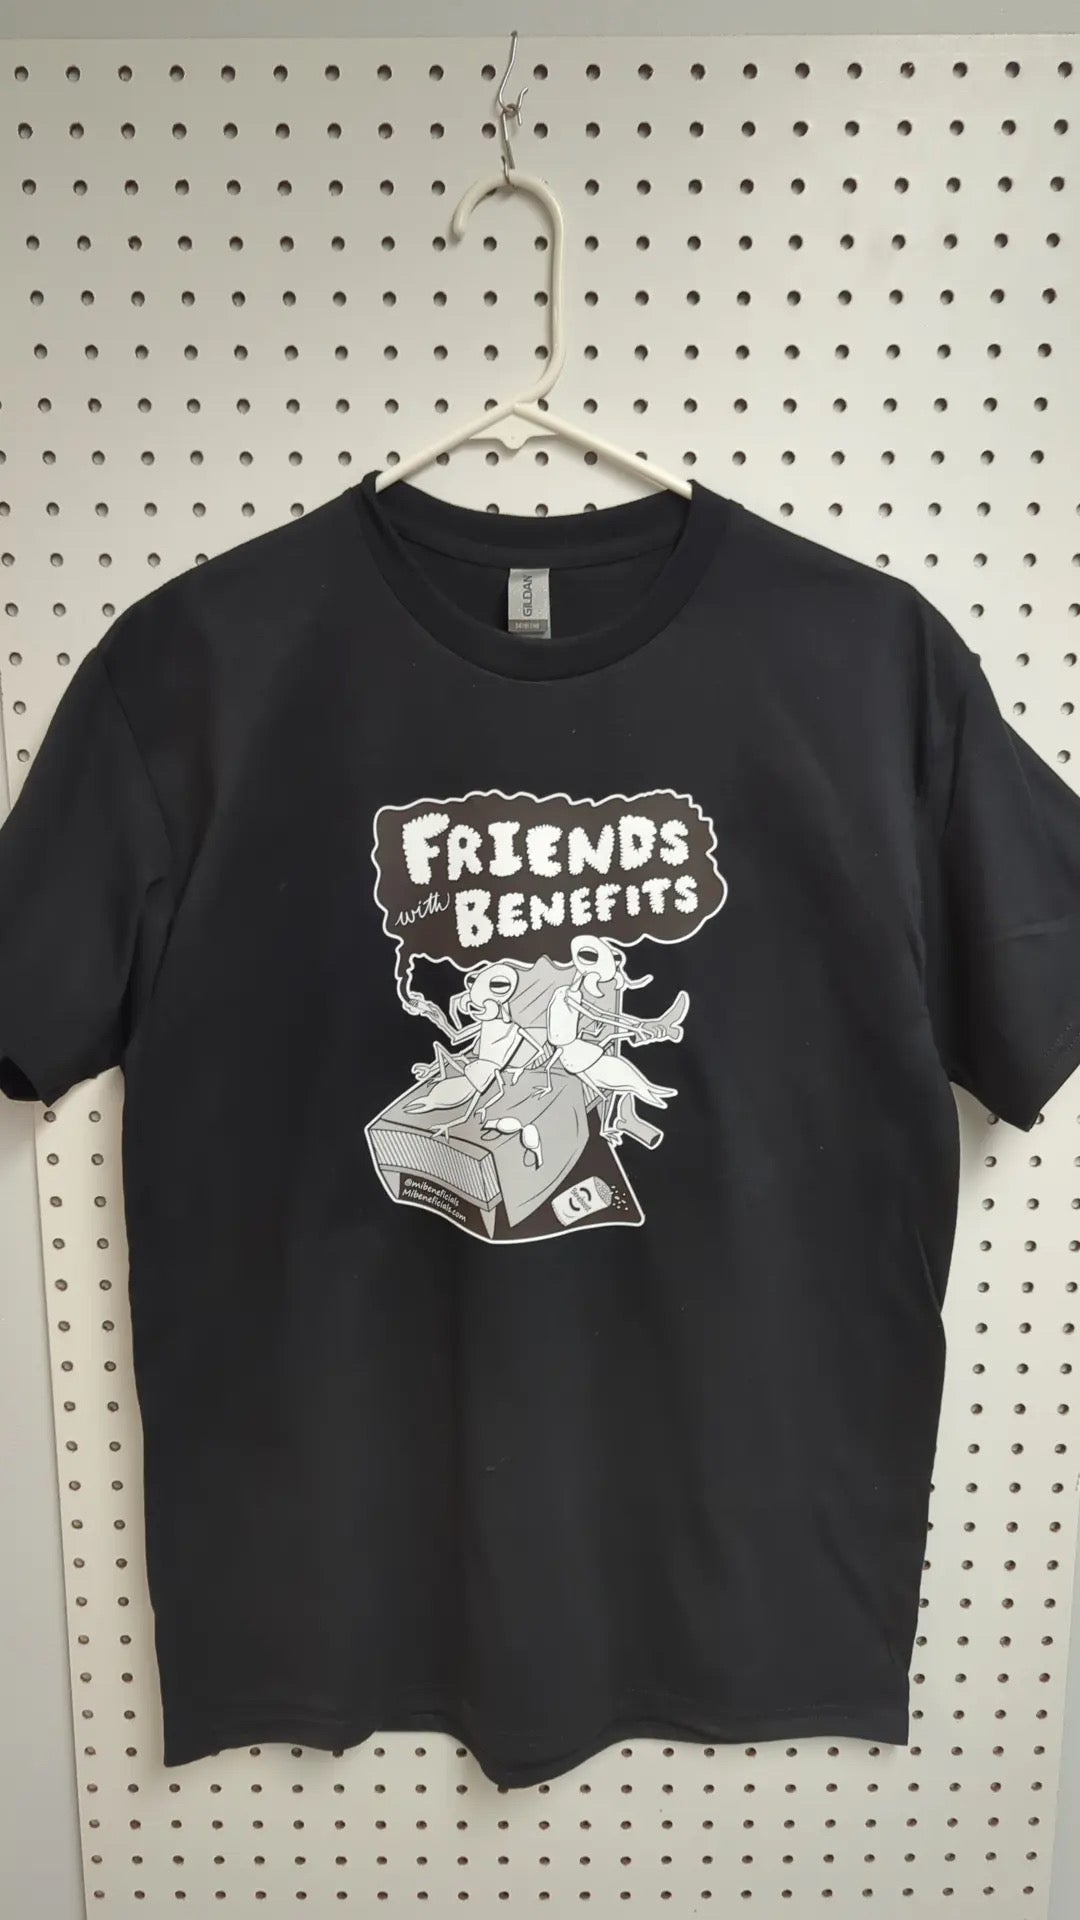 Friends with benefits t-shirt